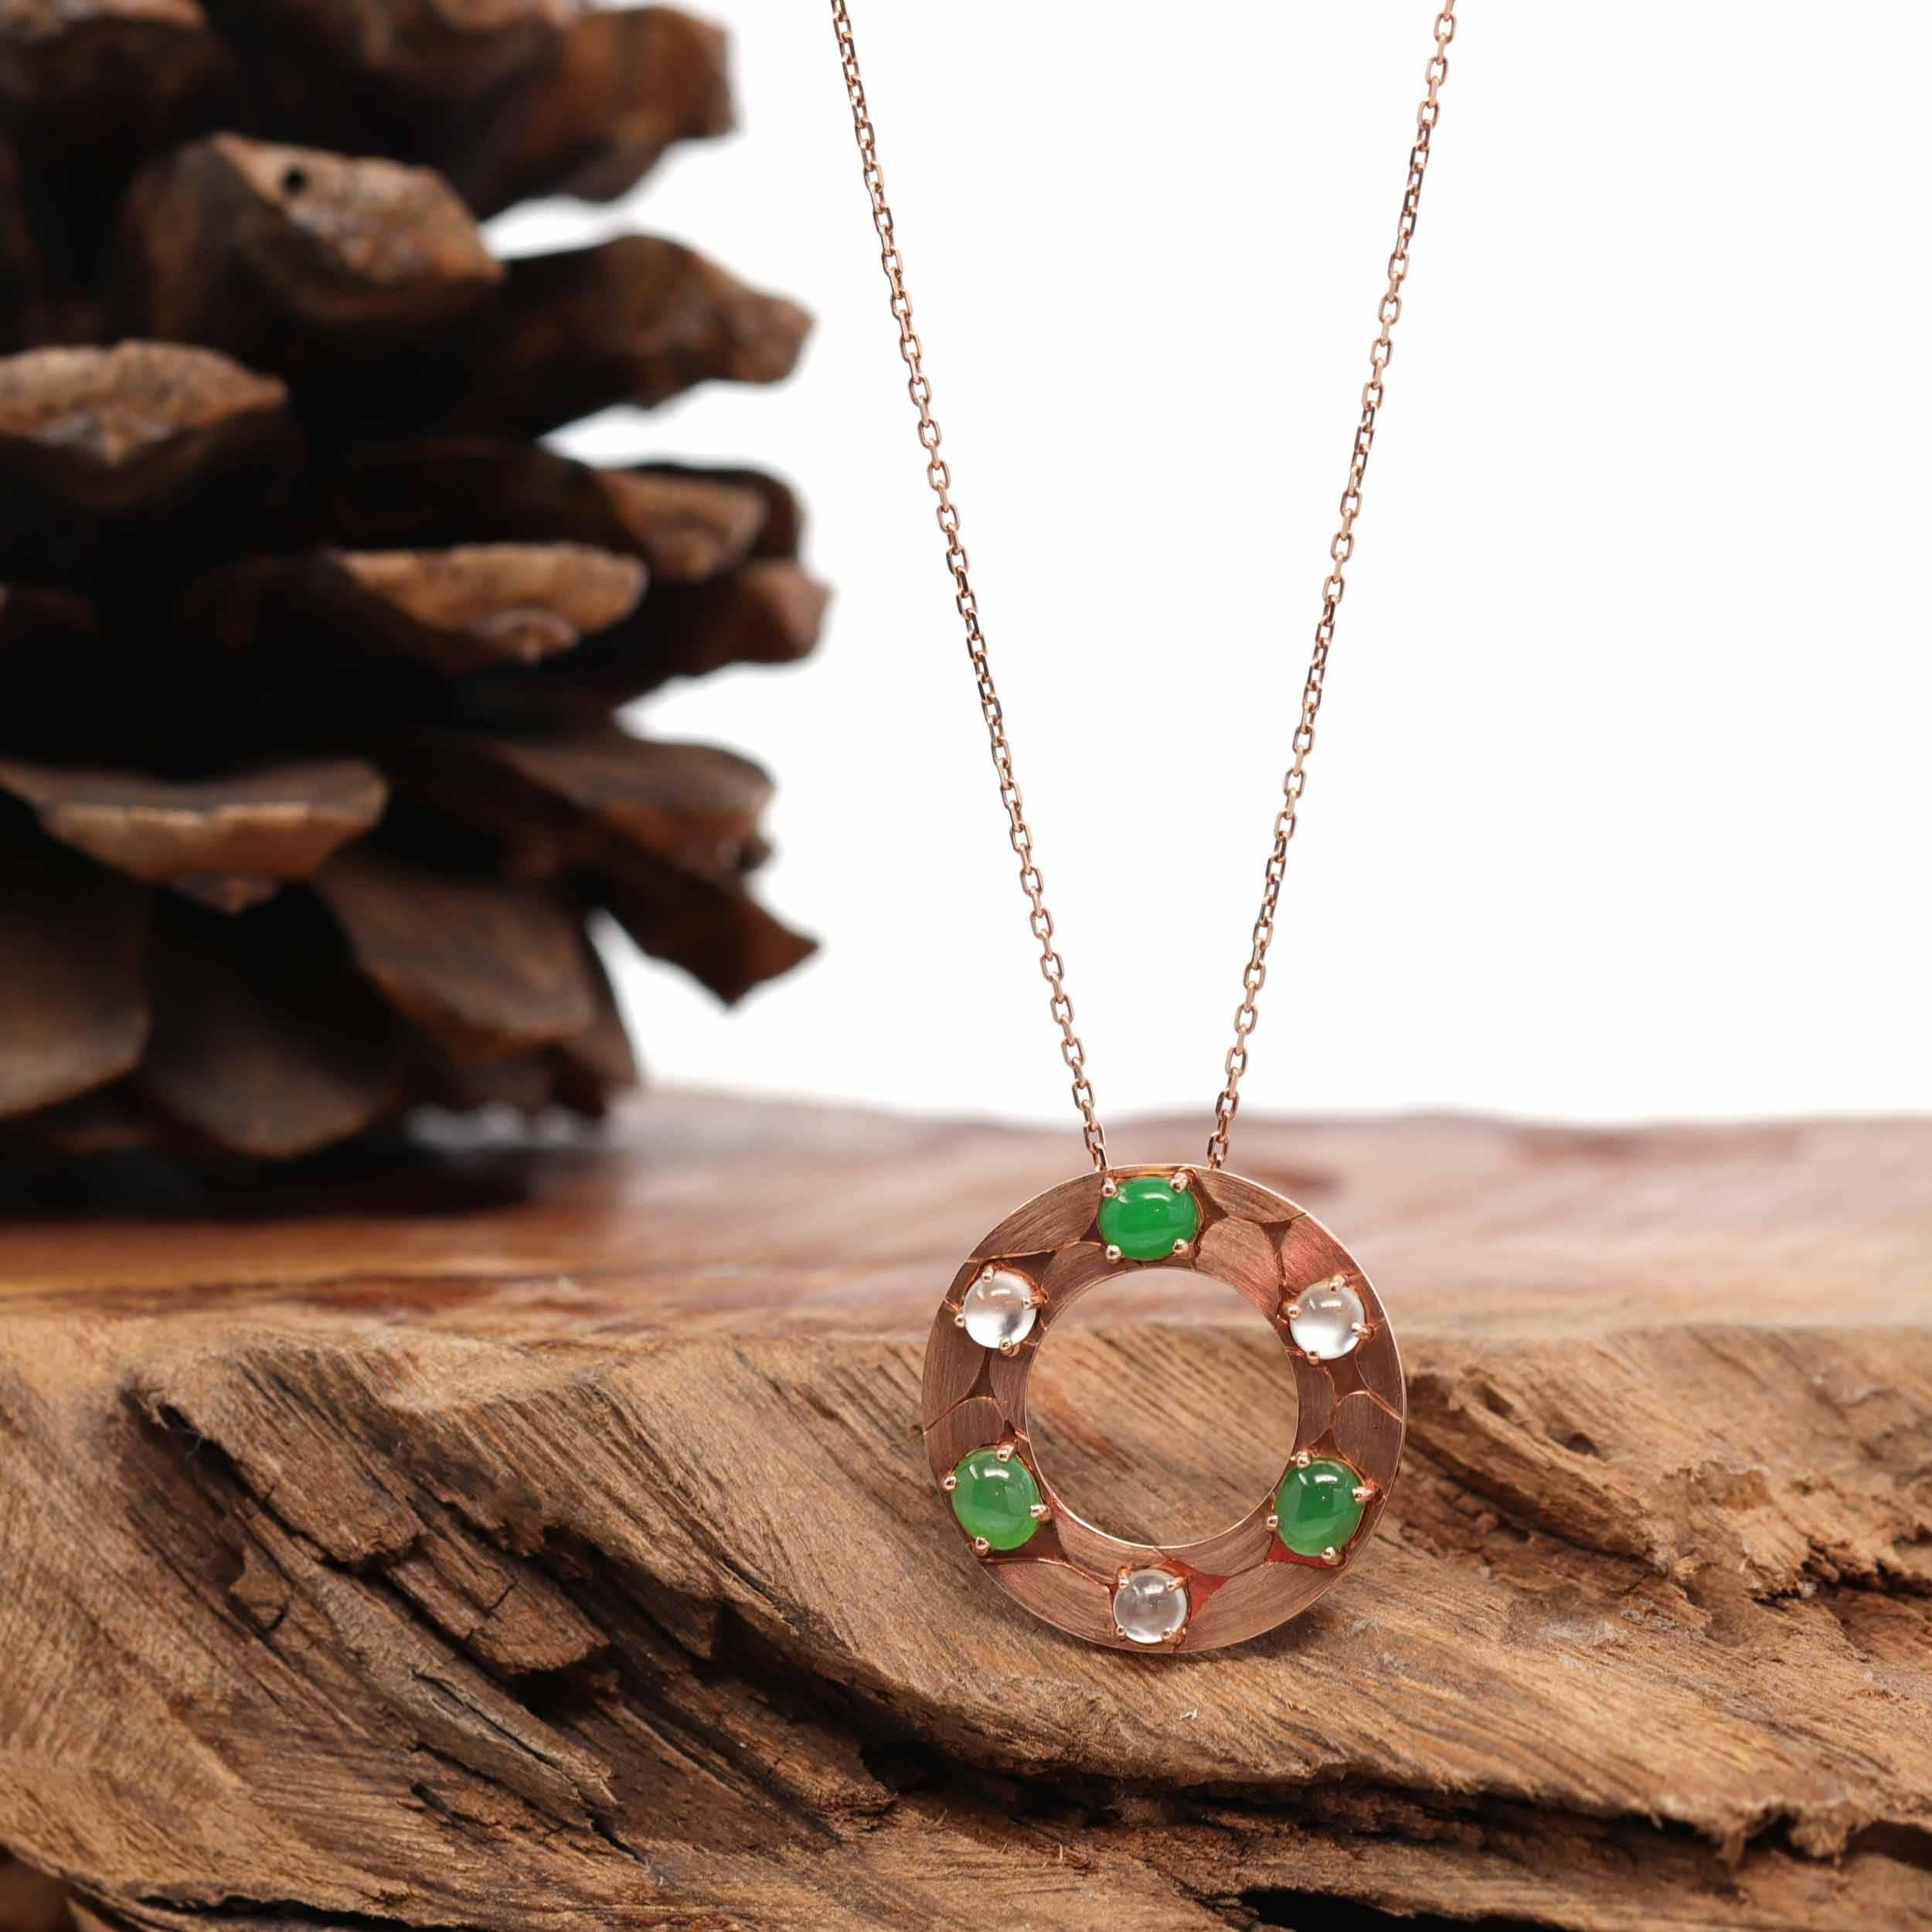 * DESIGN CONCEPT--- This necklace is made with oval genuine translucent ice Burmese jadeite. The design was inspired by the morning glory flower. A modern spin on mother nature's motif. Representing wholeness, completeness, and contentment. 
  

*